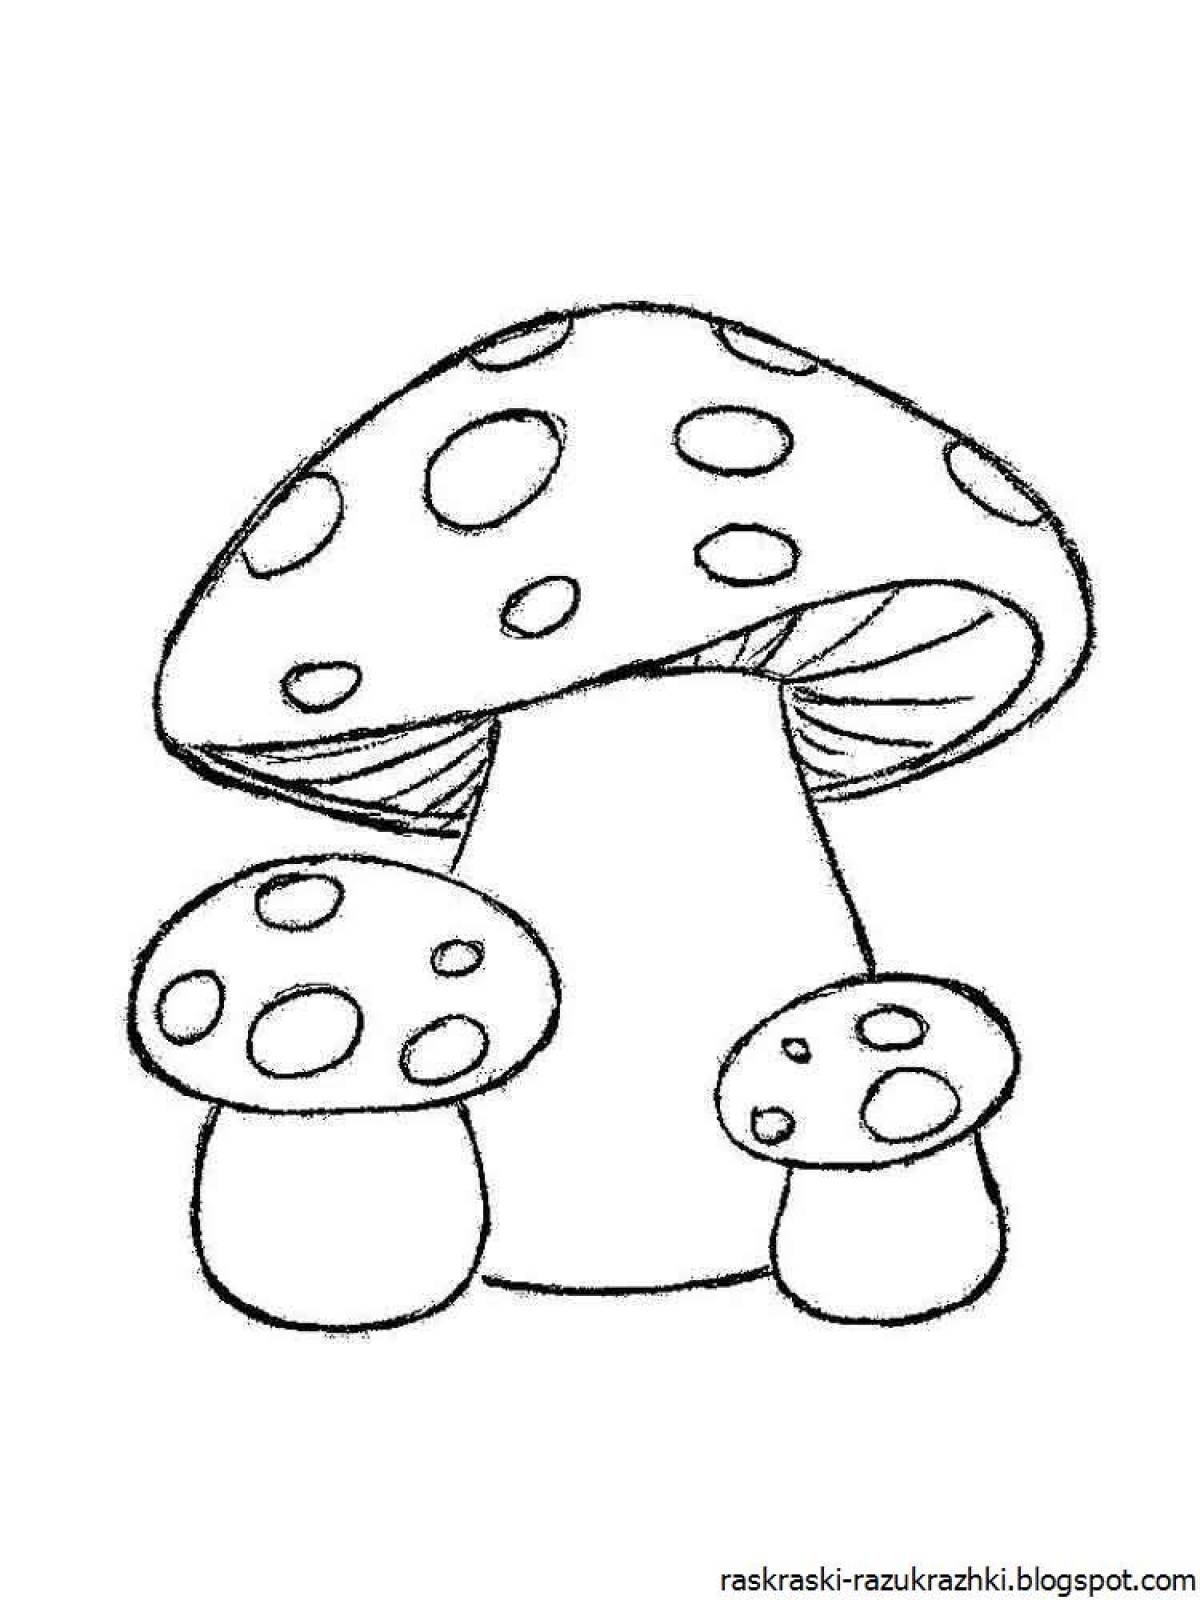 Dazzling mushroom coloring pages for kids